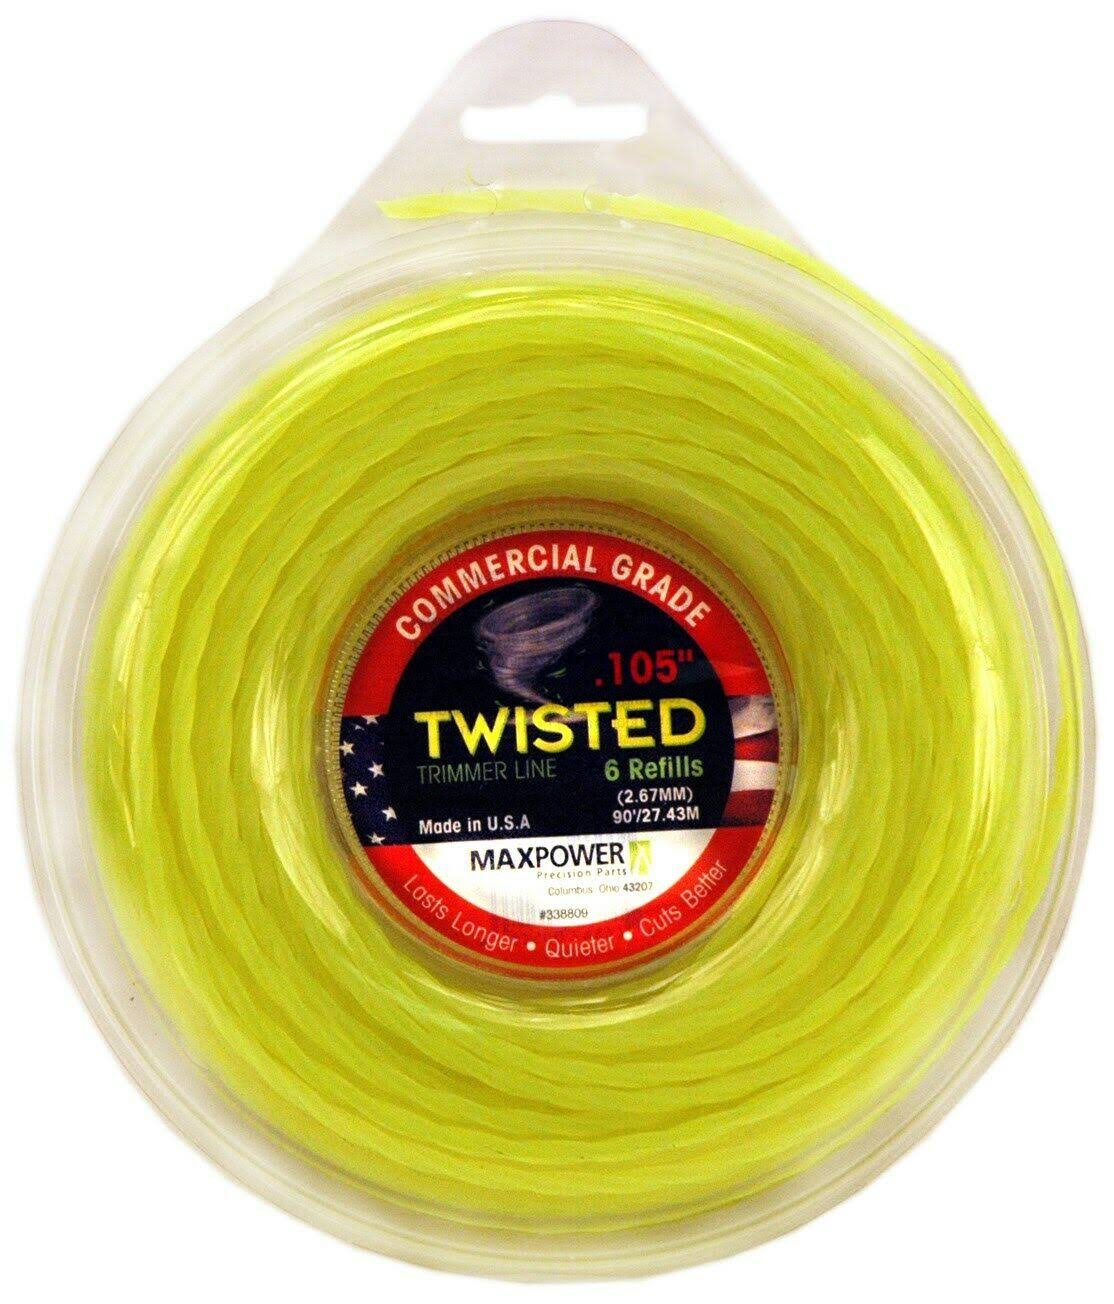 Maxpower Twisted Commercial Grade Trimmer Line - Yellow, 0.105" x 90'